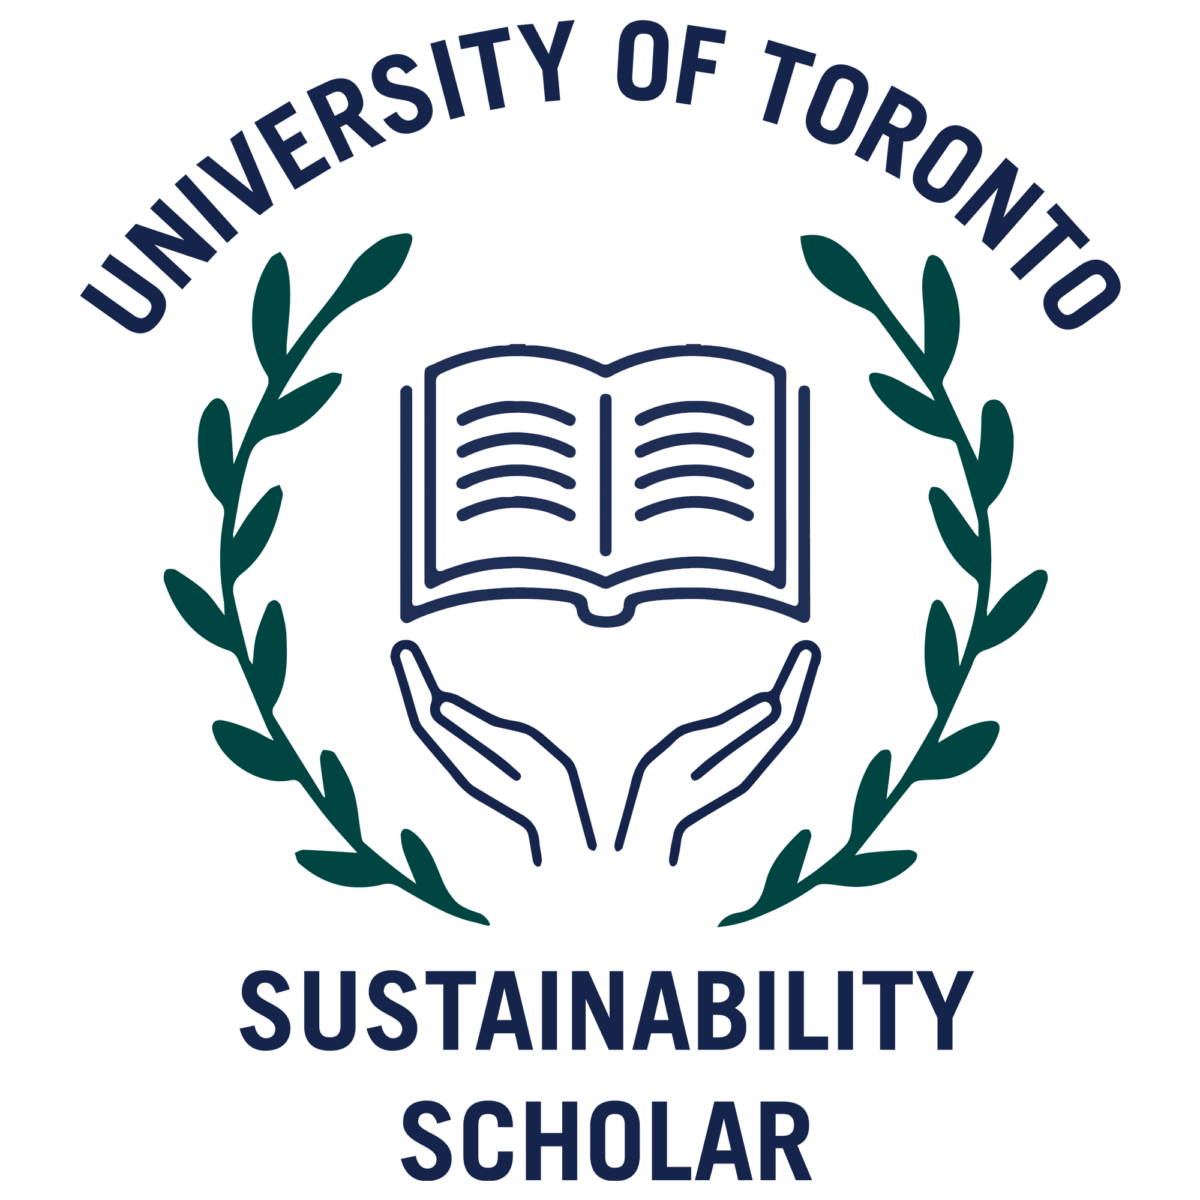 Sustainability Scholar logo, showing two hands under a book